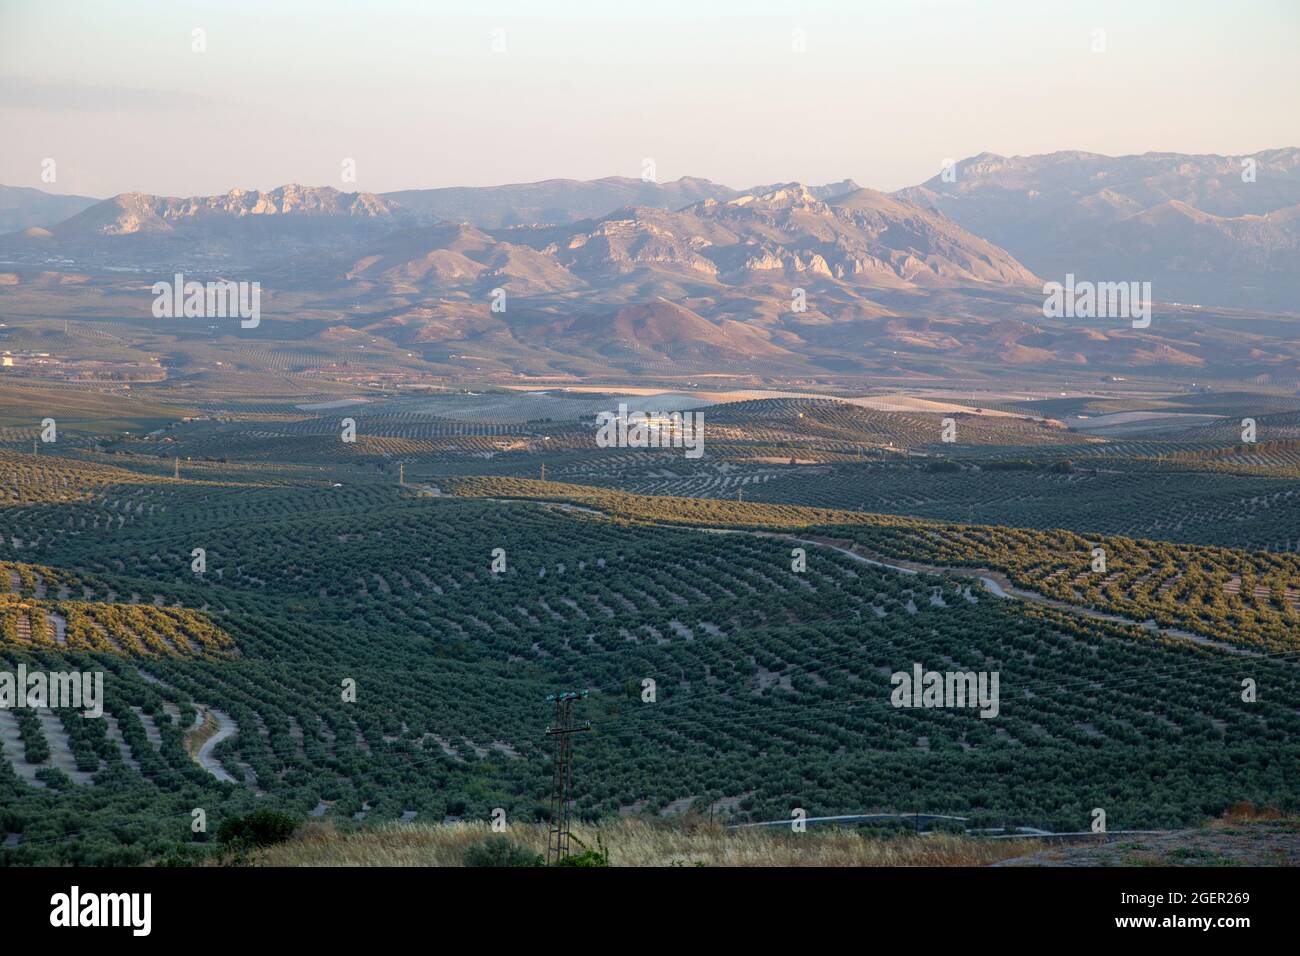 Olive trees in a field, Ubeda, Jaen Province, Andalusia, Spain Stock Photo